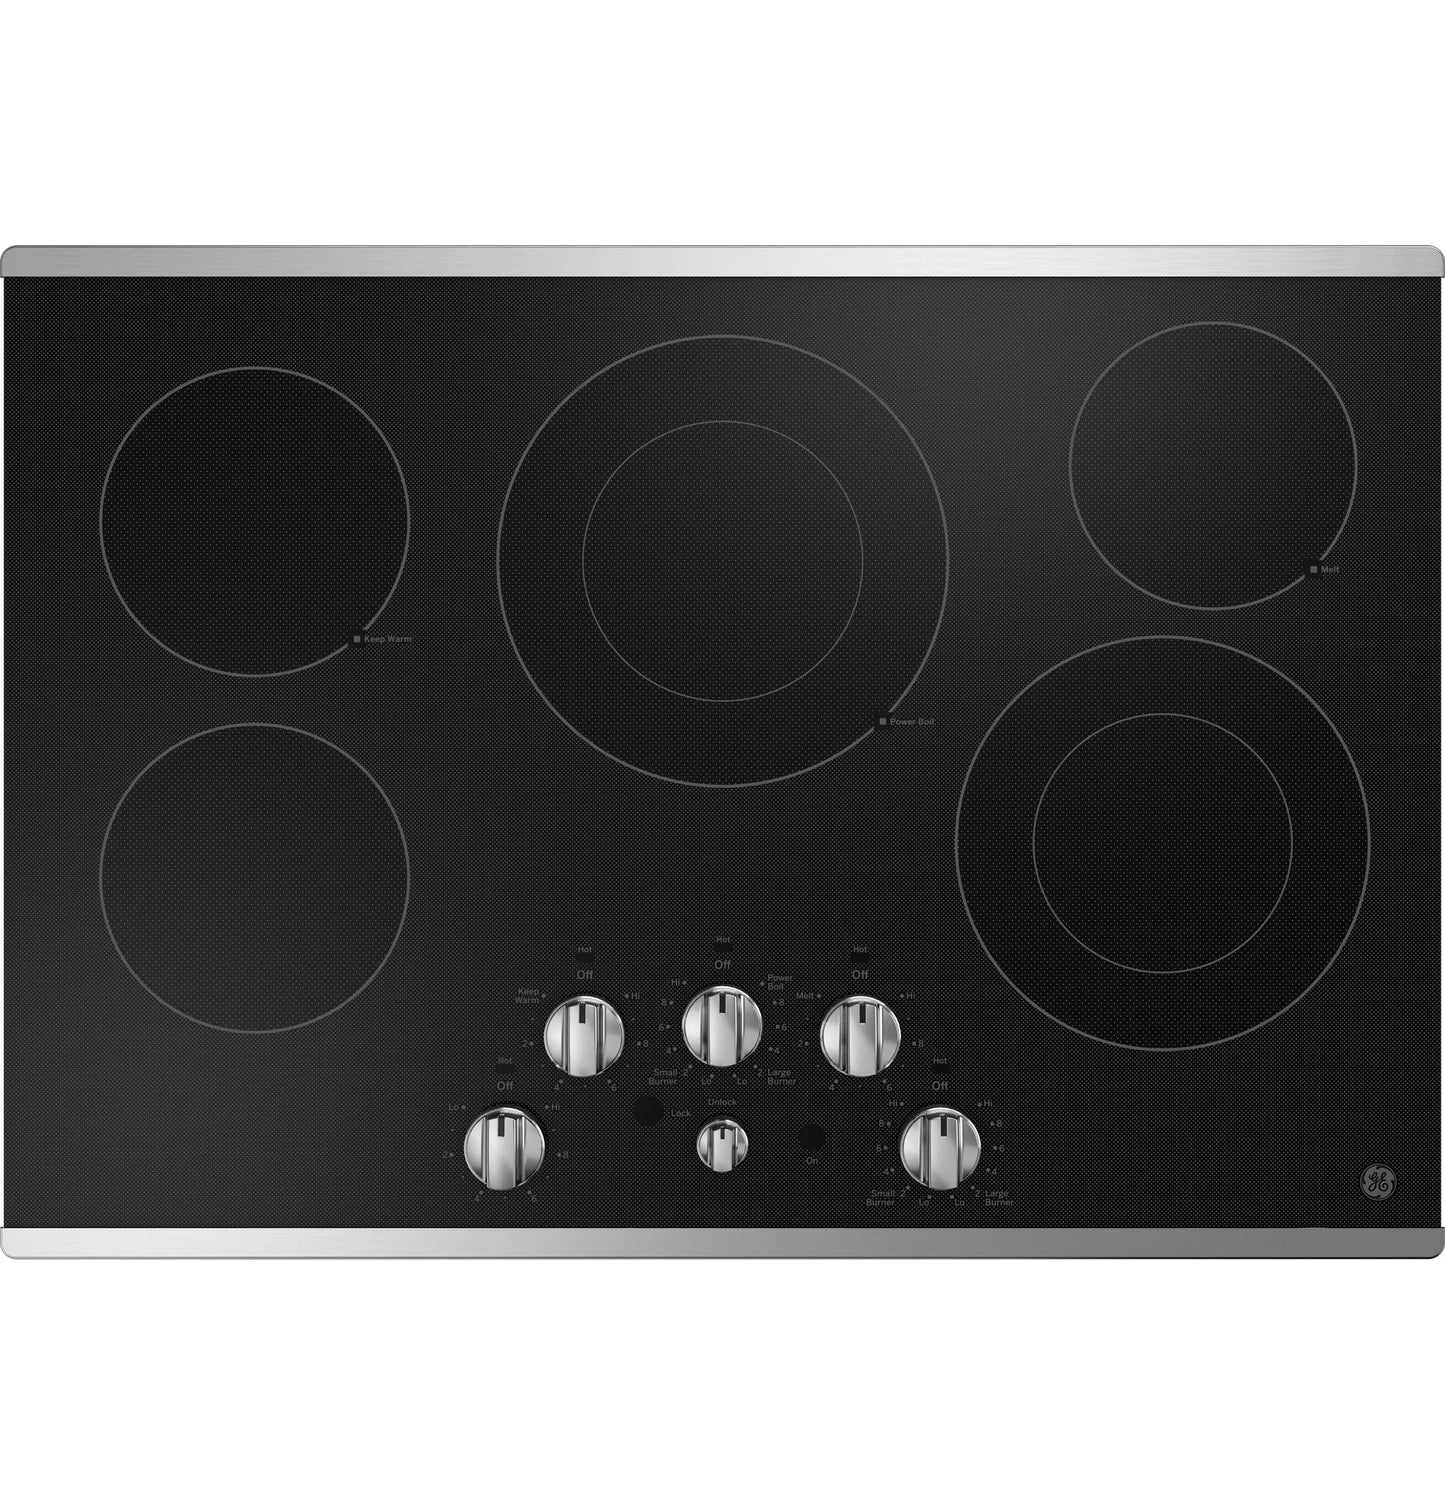 OPEN BOX 30-in 5 Element Electric Cooktop and 30-in Smart Convection Double Wall Oven paired with 1.7 Cu Ft Over-the-Range Microwave Suite in Stainless Steel